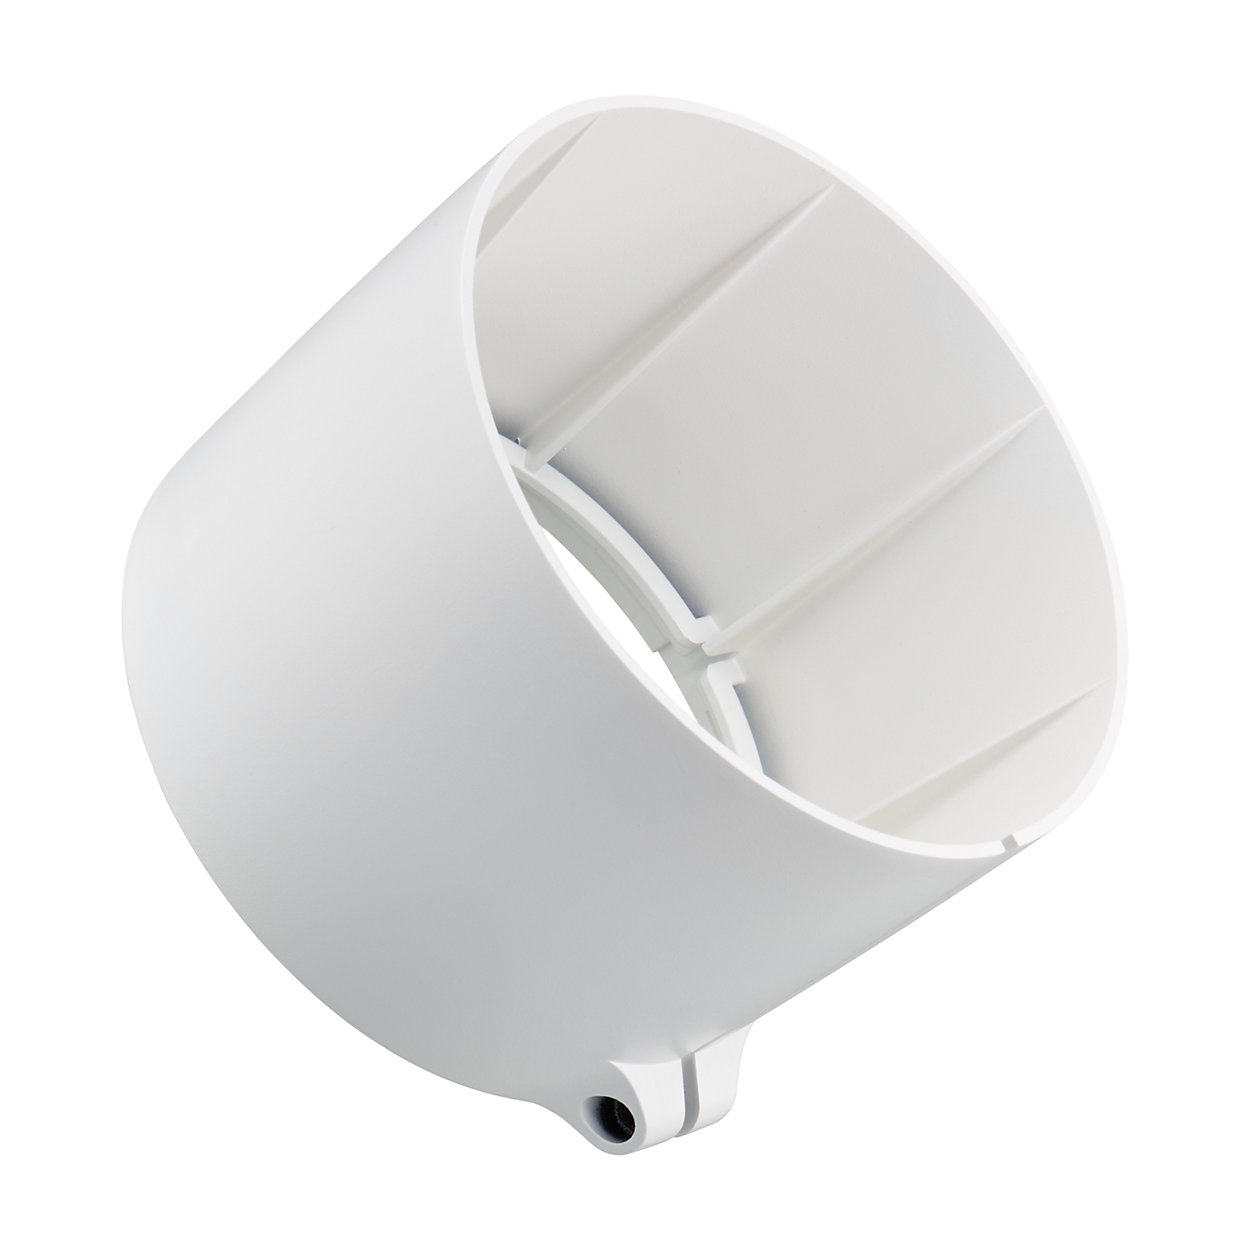 eW Burst Compact Powercore – high-output, exterior white spotlight for accent and site lighting